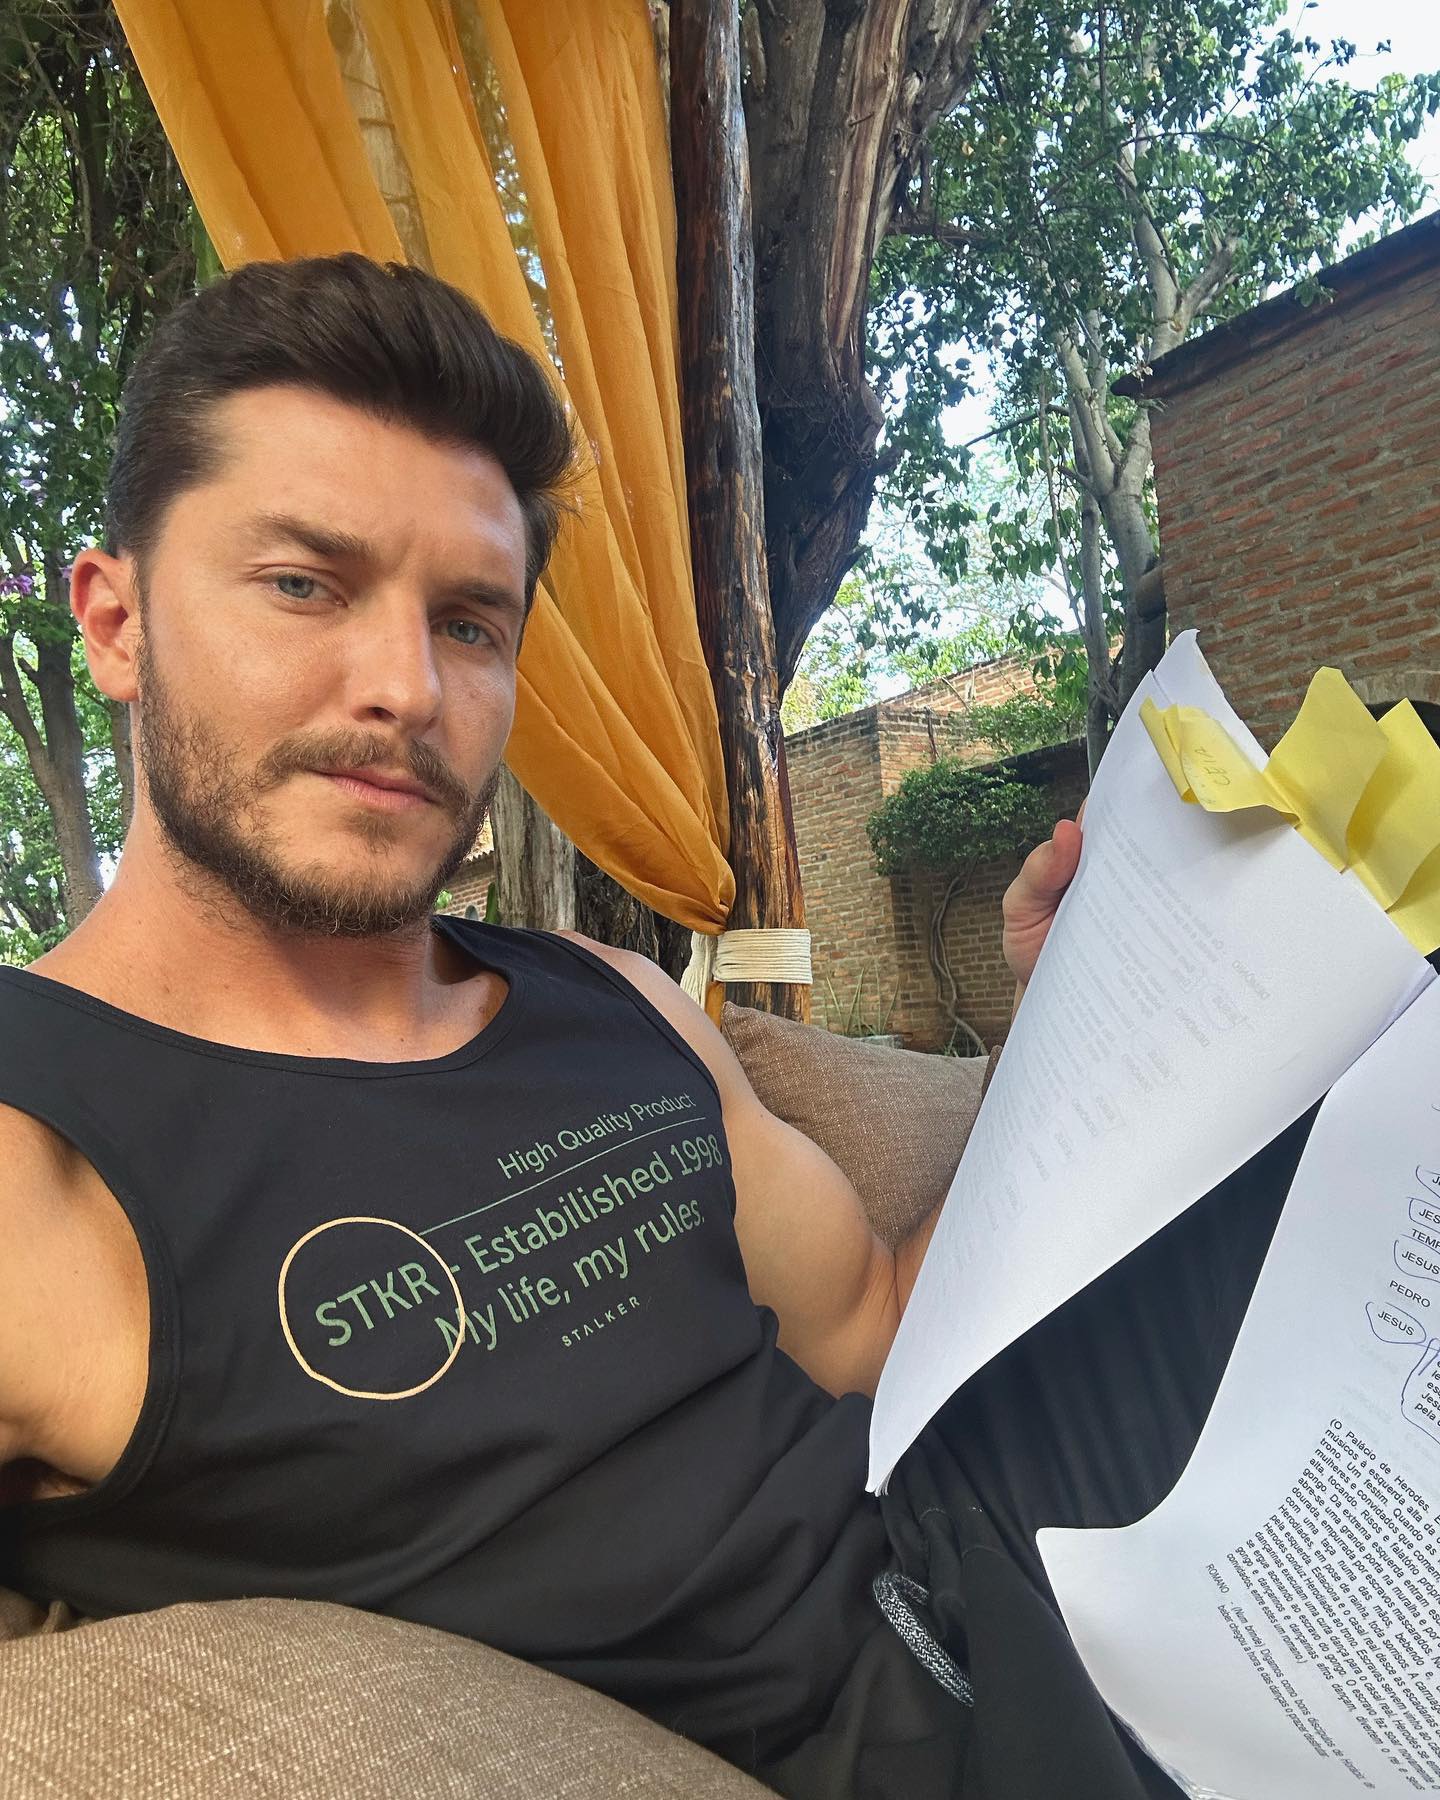 https://e.radikal.host/2023/04/20/Photo-by-Klebber-Toledo-on-March-31-2023.-May-be-an-image-of-1-person-beard-studying-top-outdoors-and-text-that-says-Estabilished-199-High-Quality-Product-STKR-My-life-STALKER-my-rules-JESU-PEDRO-JESU.jpg